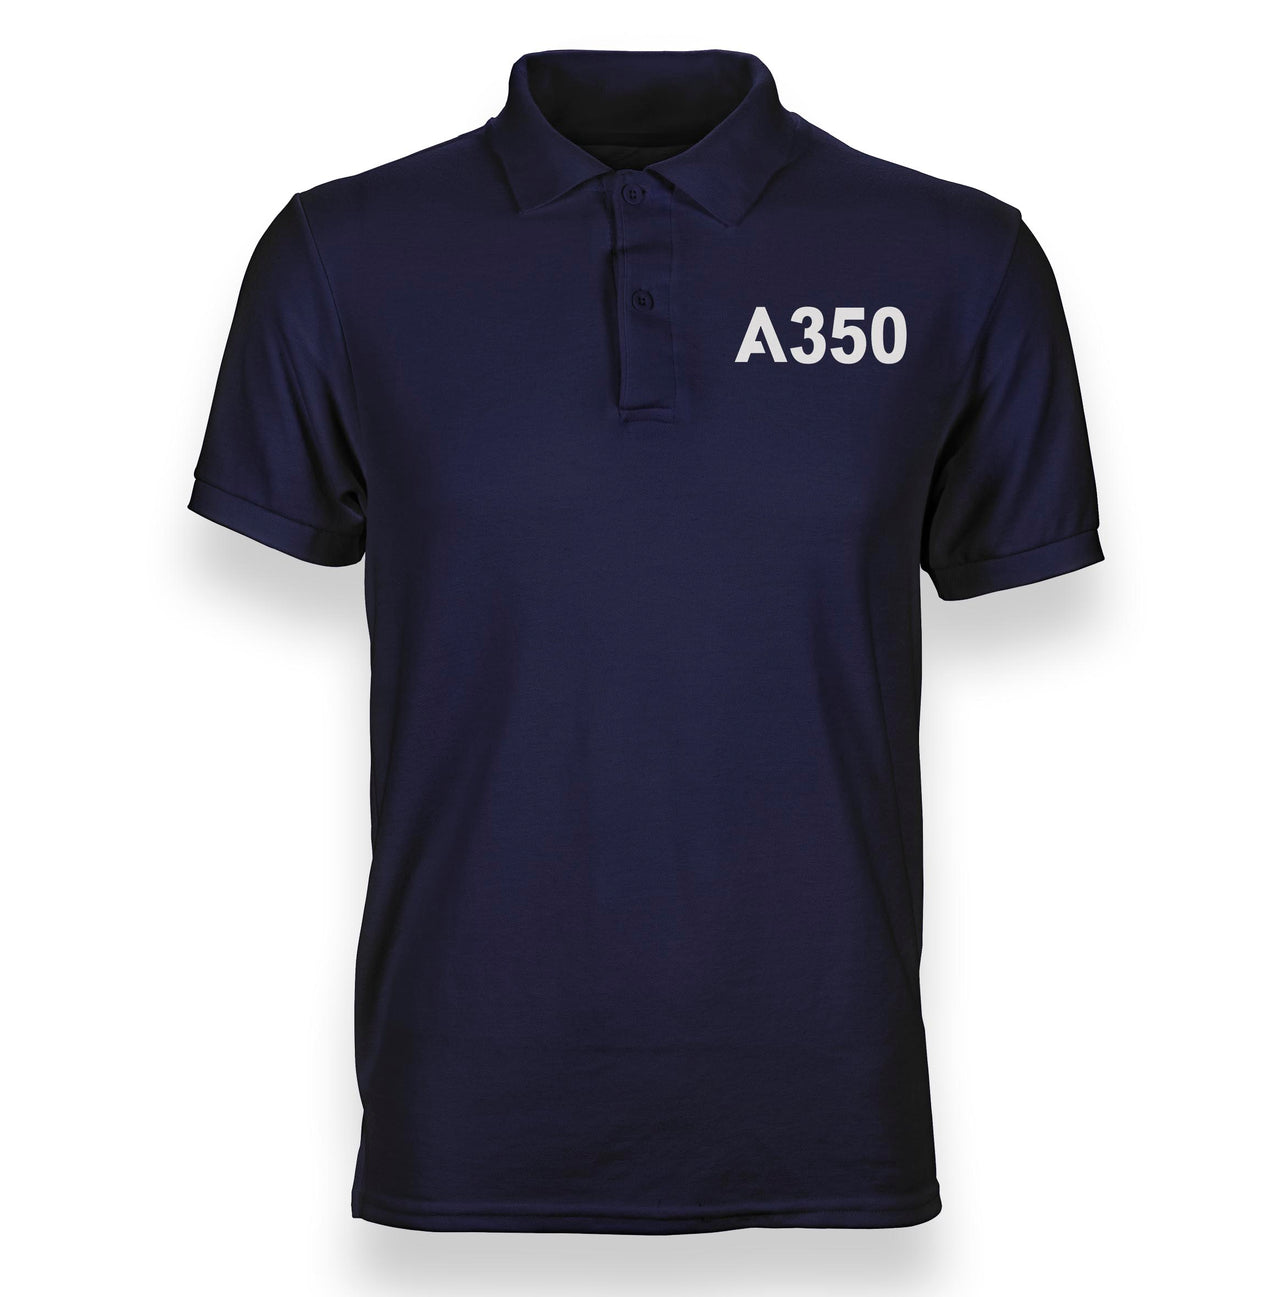 A350 Flat Text Designed Polo T-Shirts